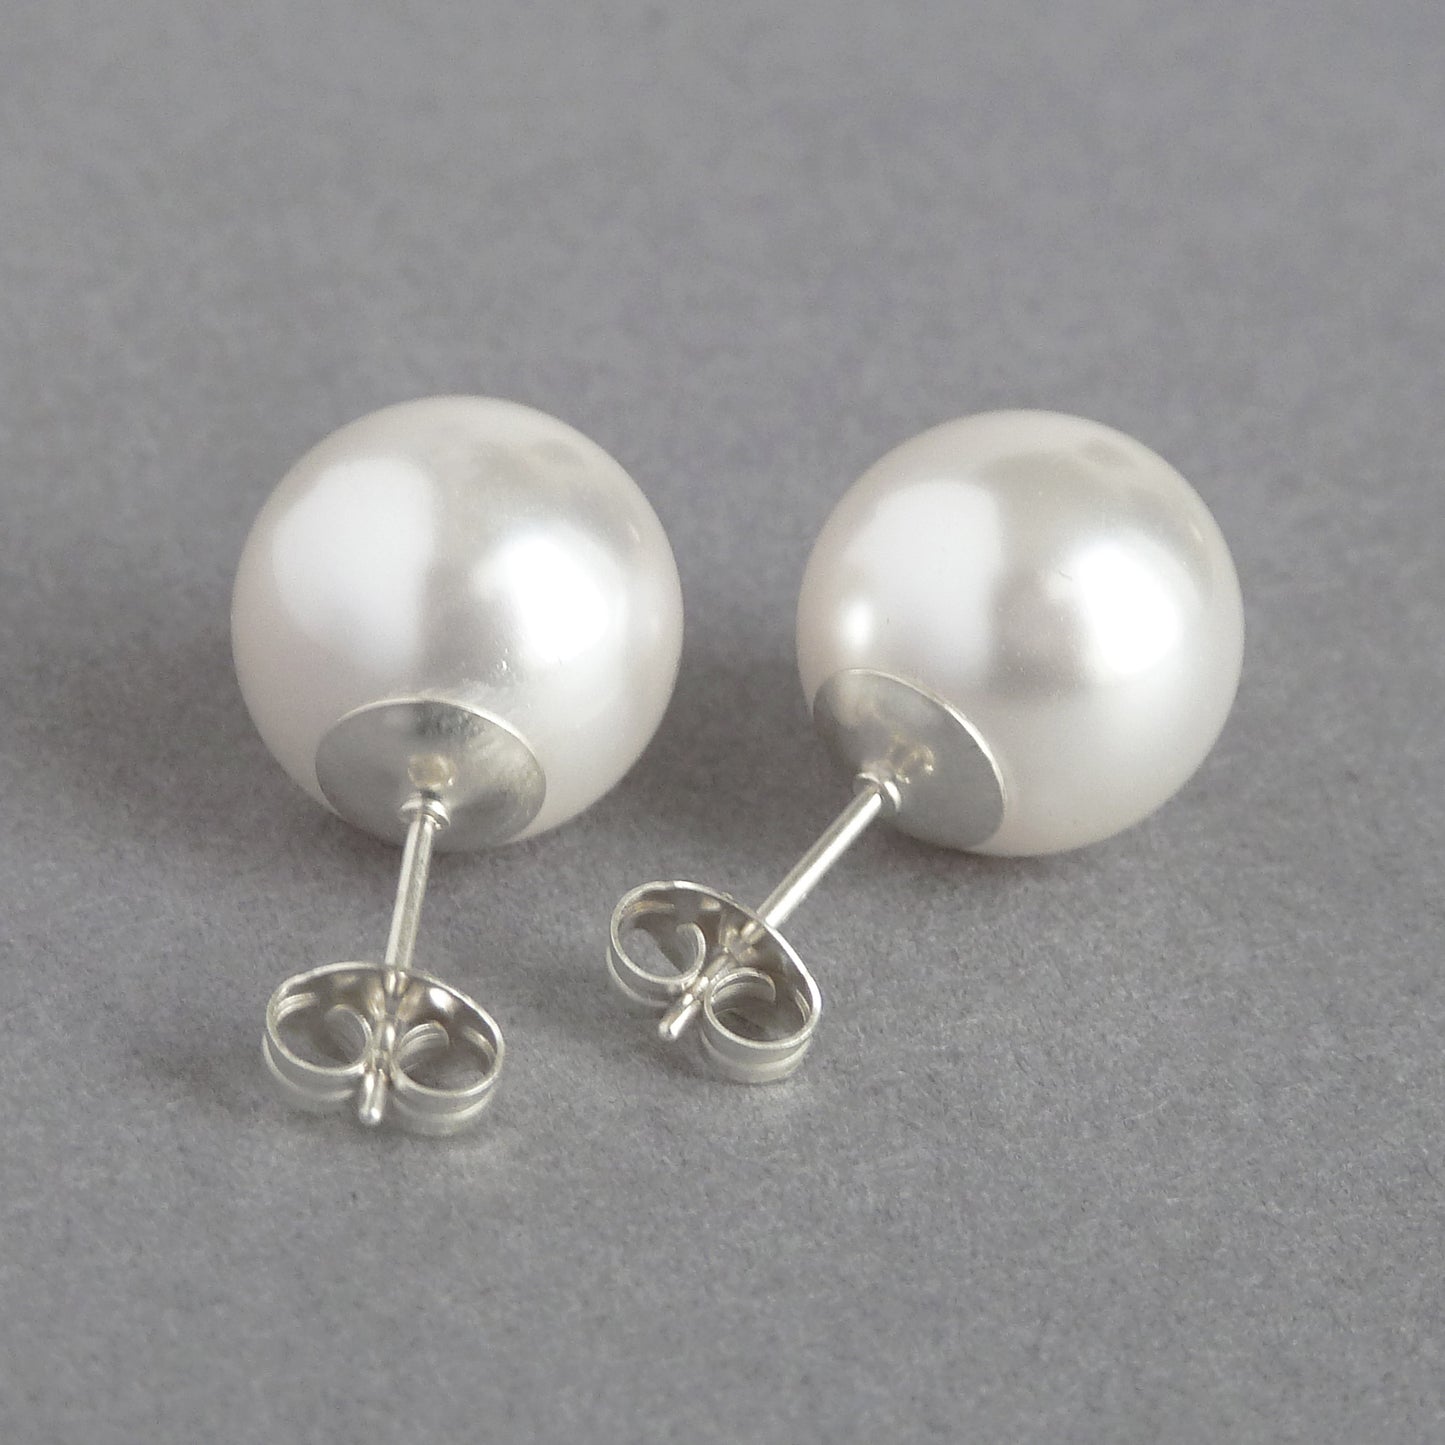 Large 12mm white pearl studs